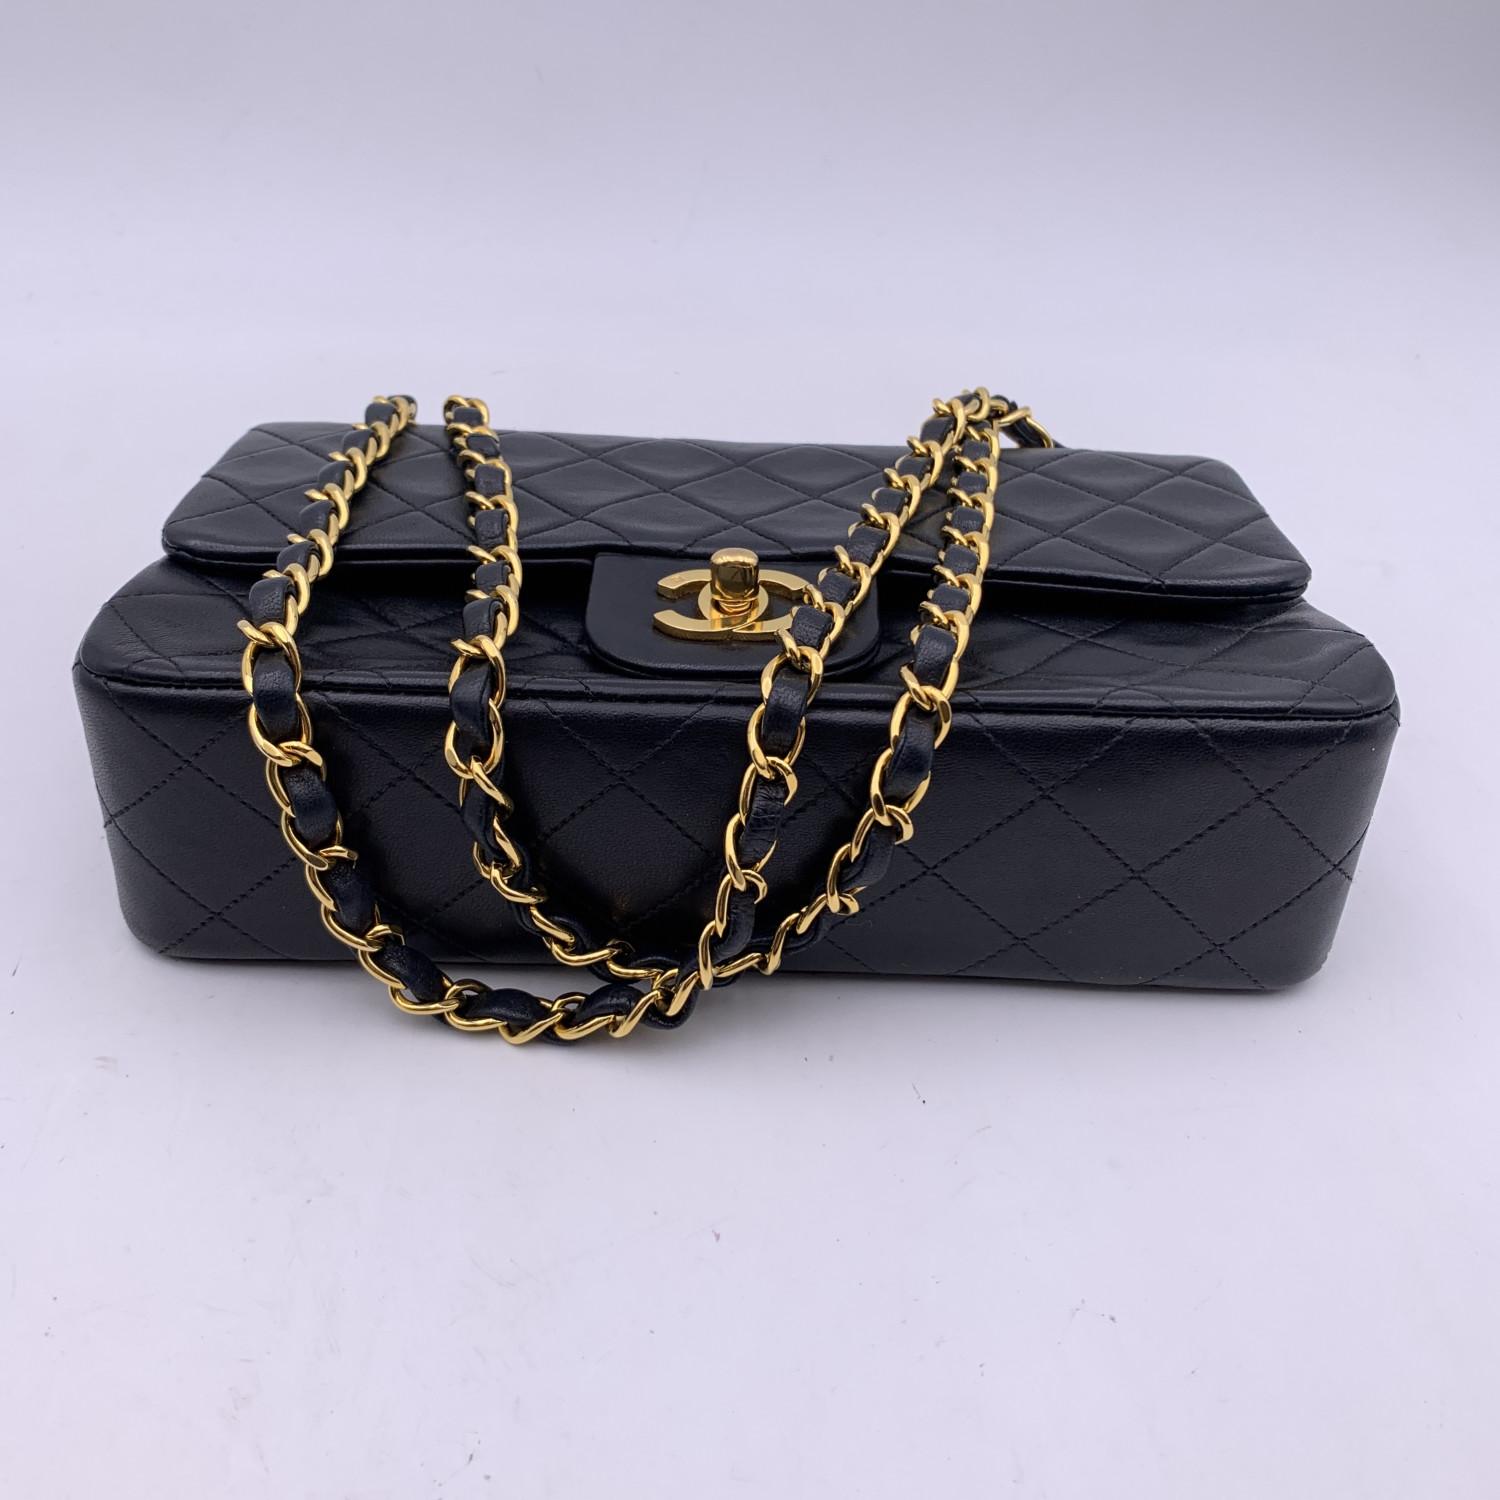 Chanel Vintage Black Quilted Timeless Classic Small 2.55 Bag 23 cm For Sale 2